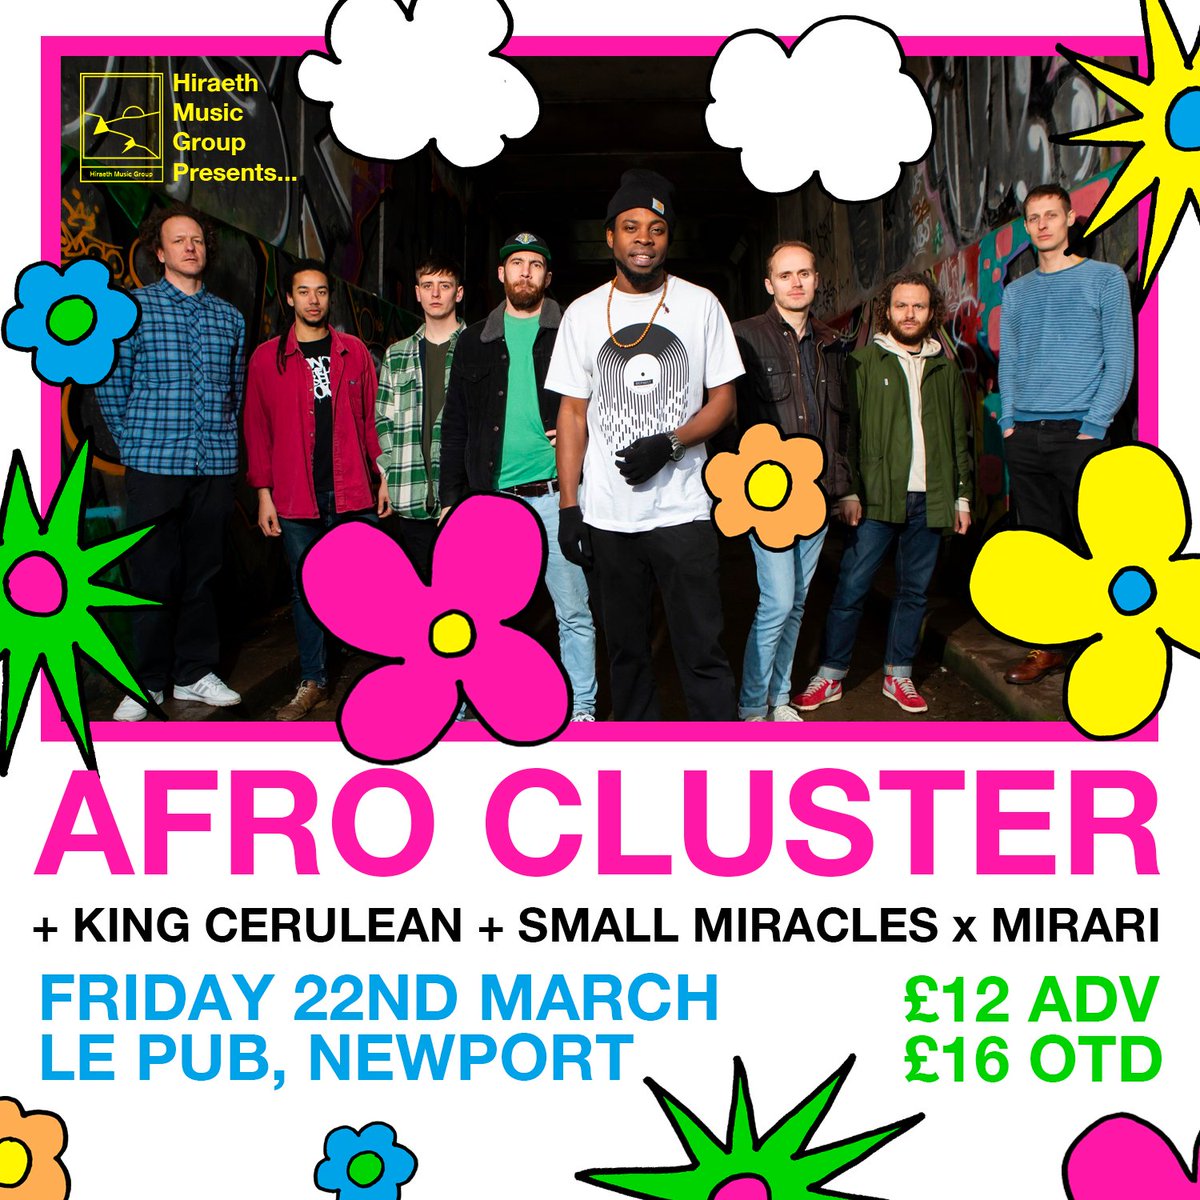 Venue change for @afrocluster on 22/03, all tickets remain valid & going to be an absolute belter! Step too, only a few weeks to go ❤️🔥 xx @kingcerulean @smallmiracles_ @smallmiracles_ @Lepub